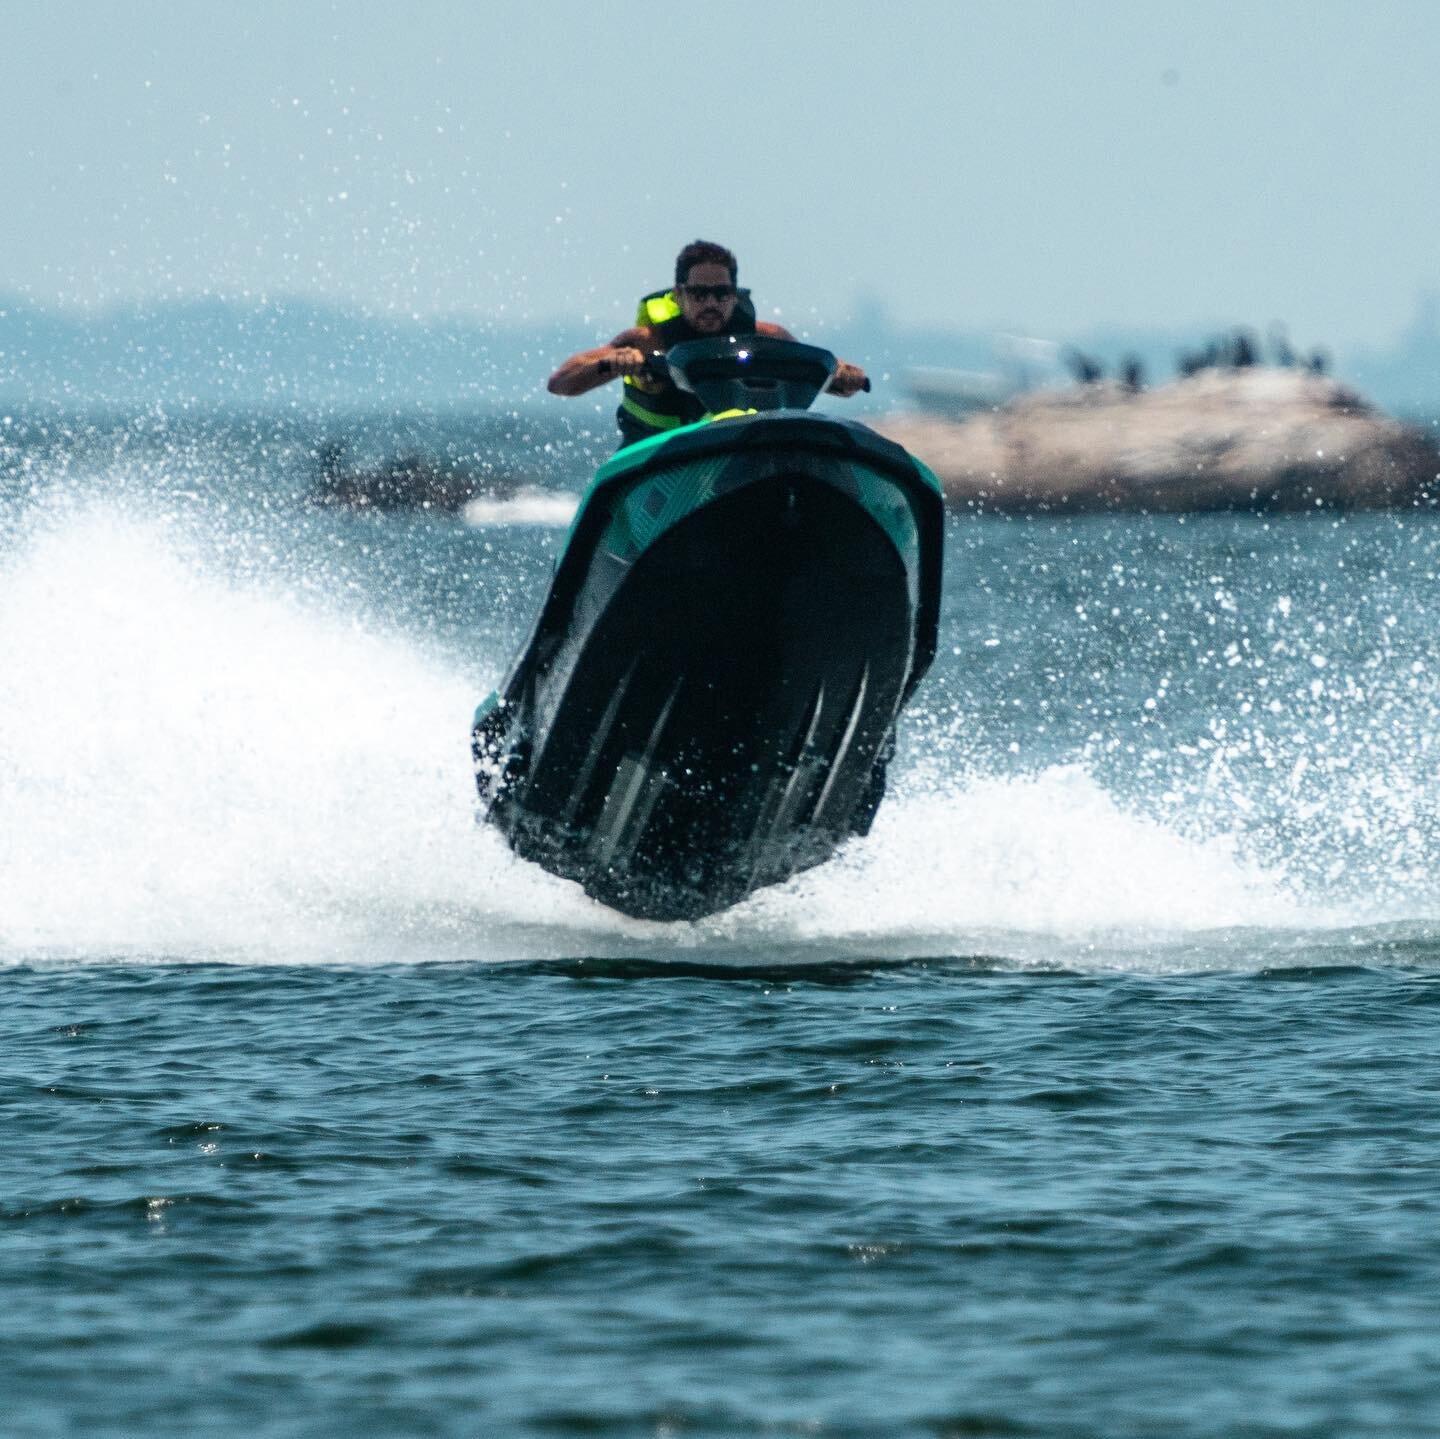 I guess you can say I enjoyed tooling around on this thing. I think I spent more time in the air than on the water. 📷 @krsnajevons thanks @keithj327 for the opportunity.